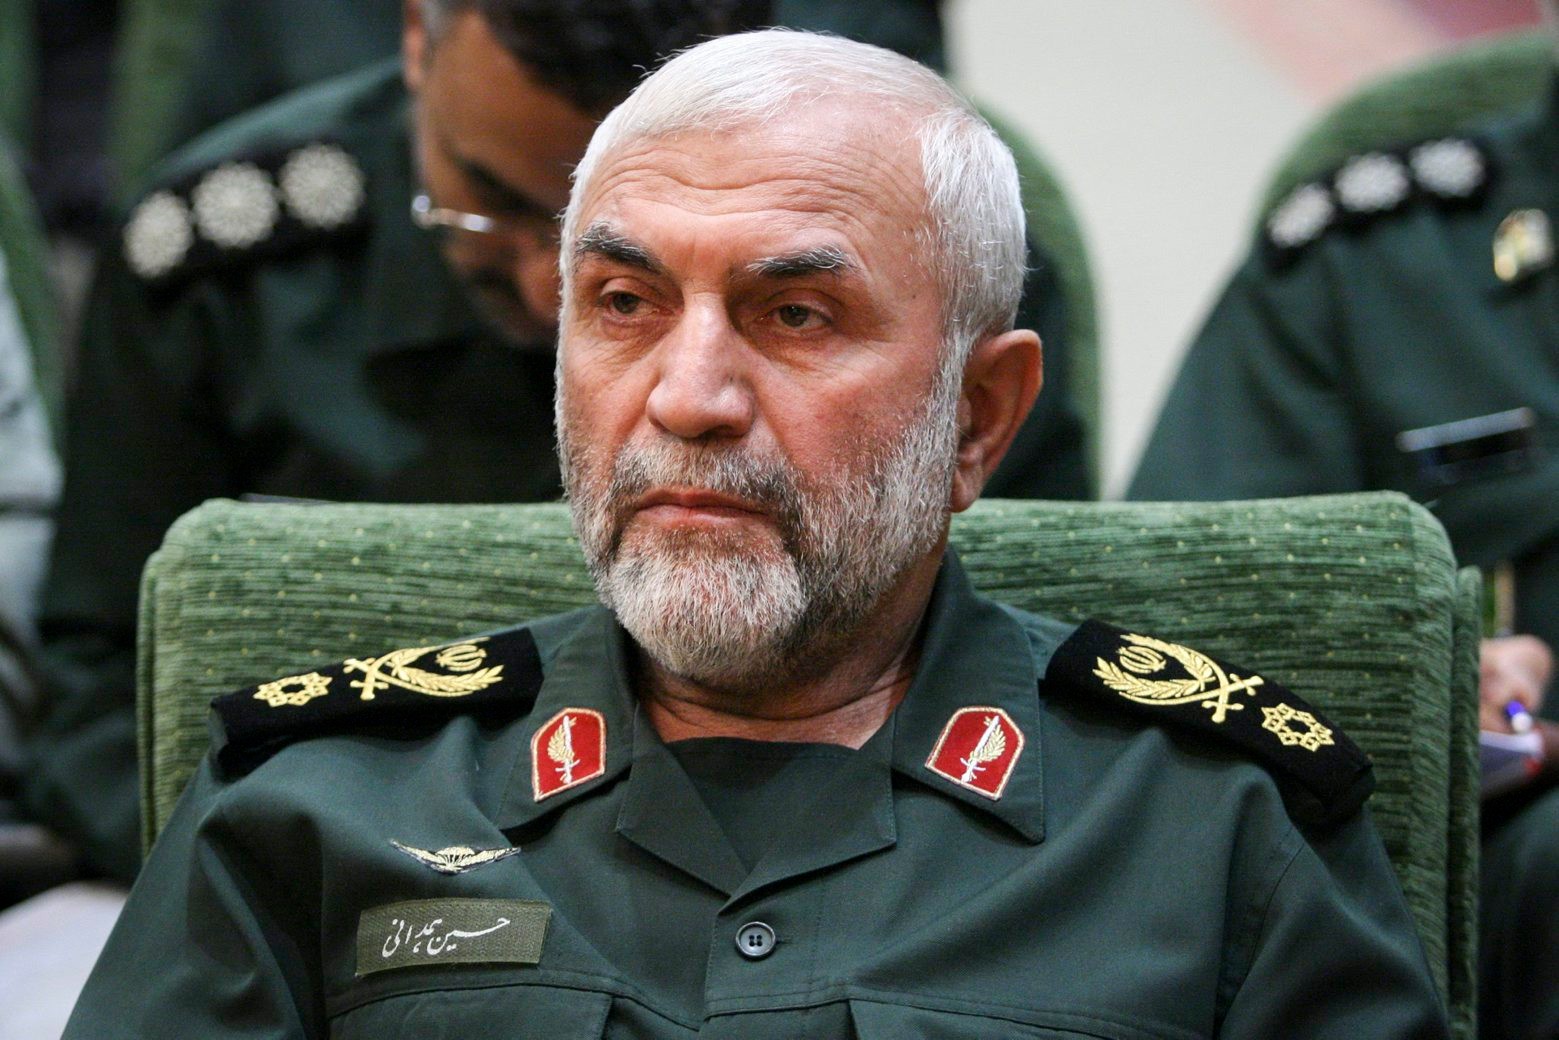 In this Dec. 9, 2009 photo, released by Iranian Tasnim News Agency, Iranian Revolutionary Guard Gen. Hossein Hamedani sits in a meeting in Tehran, Iran. Hamedani, a senior commander in Iran's powerful Revolutionary Guard was killed by Islamic State extremists on the outskirts of the northern Syrian city of Aleppo, Iranian state media reported on Friday. A state television report said that Gen. Hossein Hamedani was killed in the suburbs of Aleppo while "carrying out an advisory mission."  (AP Photo/Tasnim News Agency, Hamed Malekpour) Mideast Iran Syria